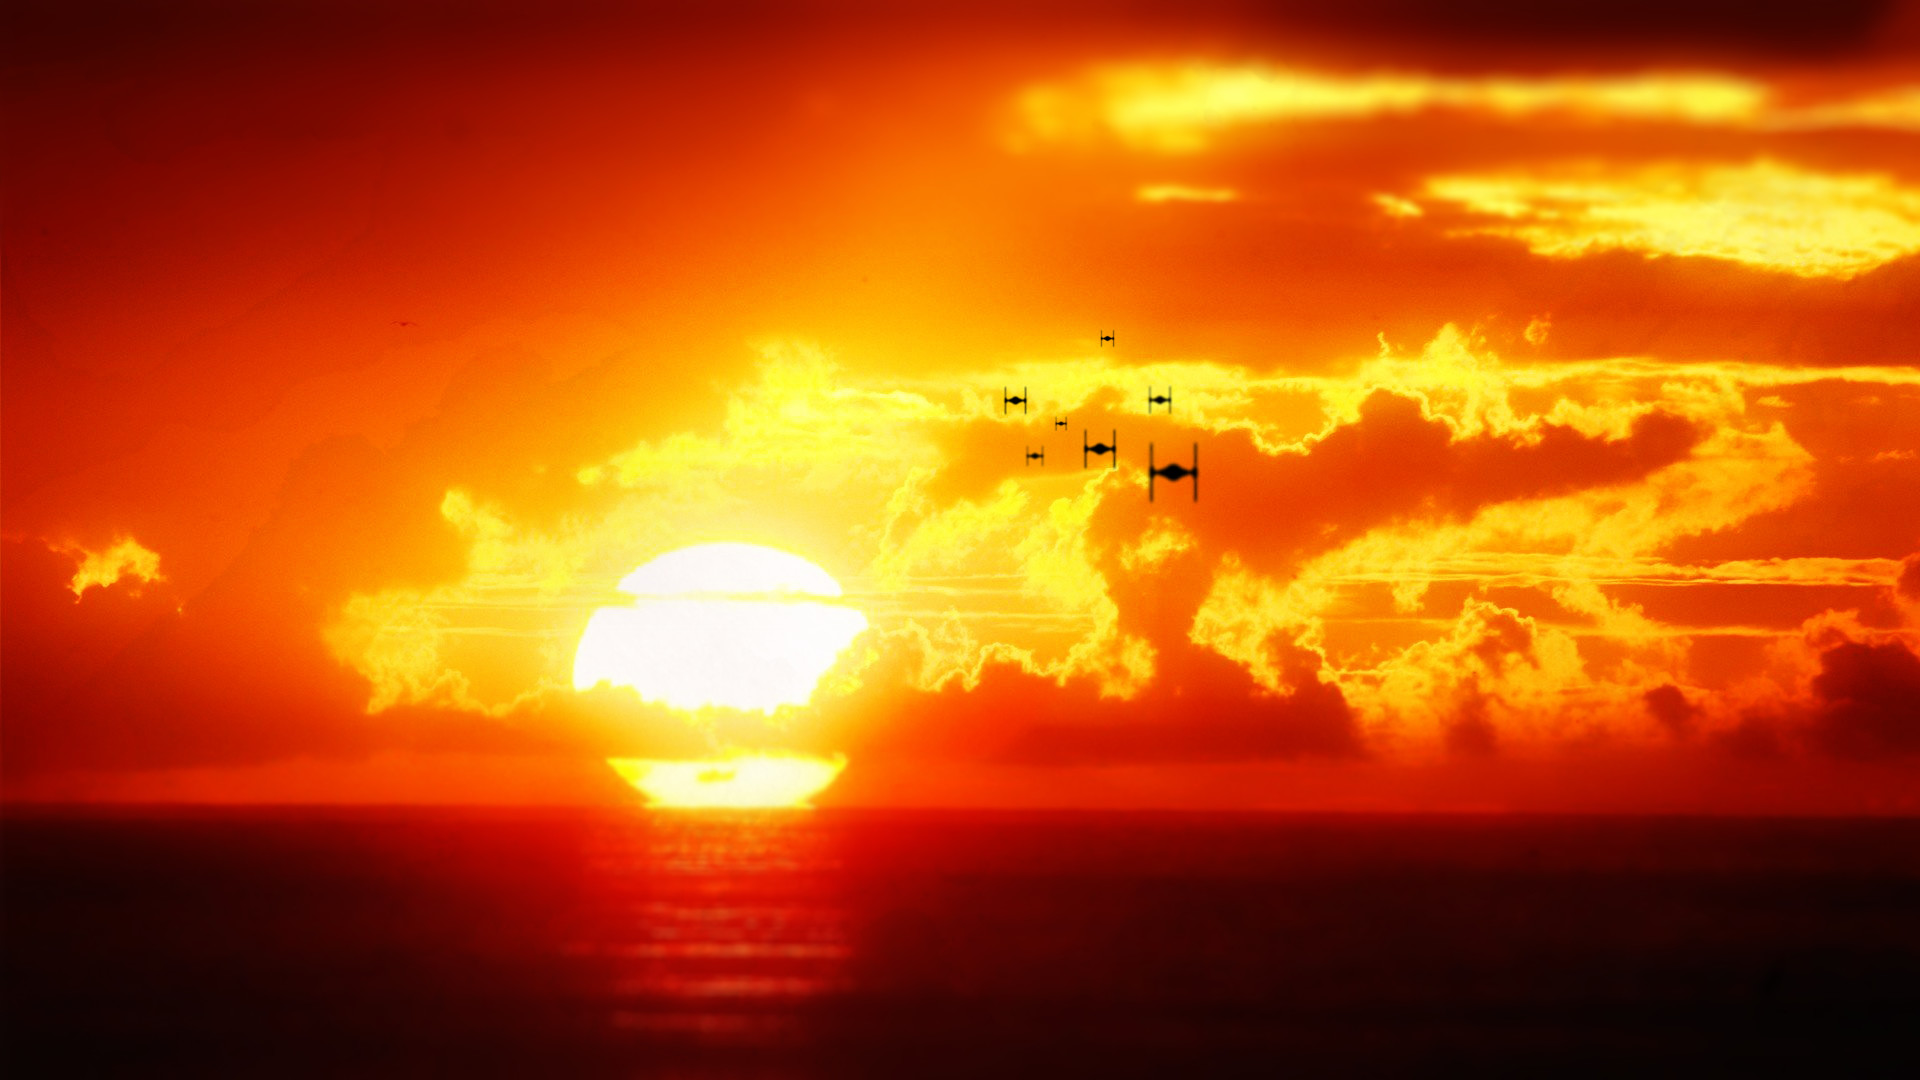 1920x1080 ... Star Wars Tie Fighter Sunset Wallpaper by NIHILUSDESIGNS